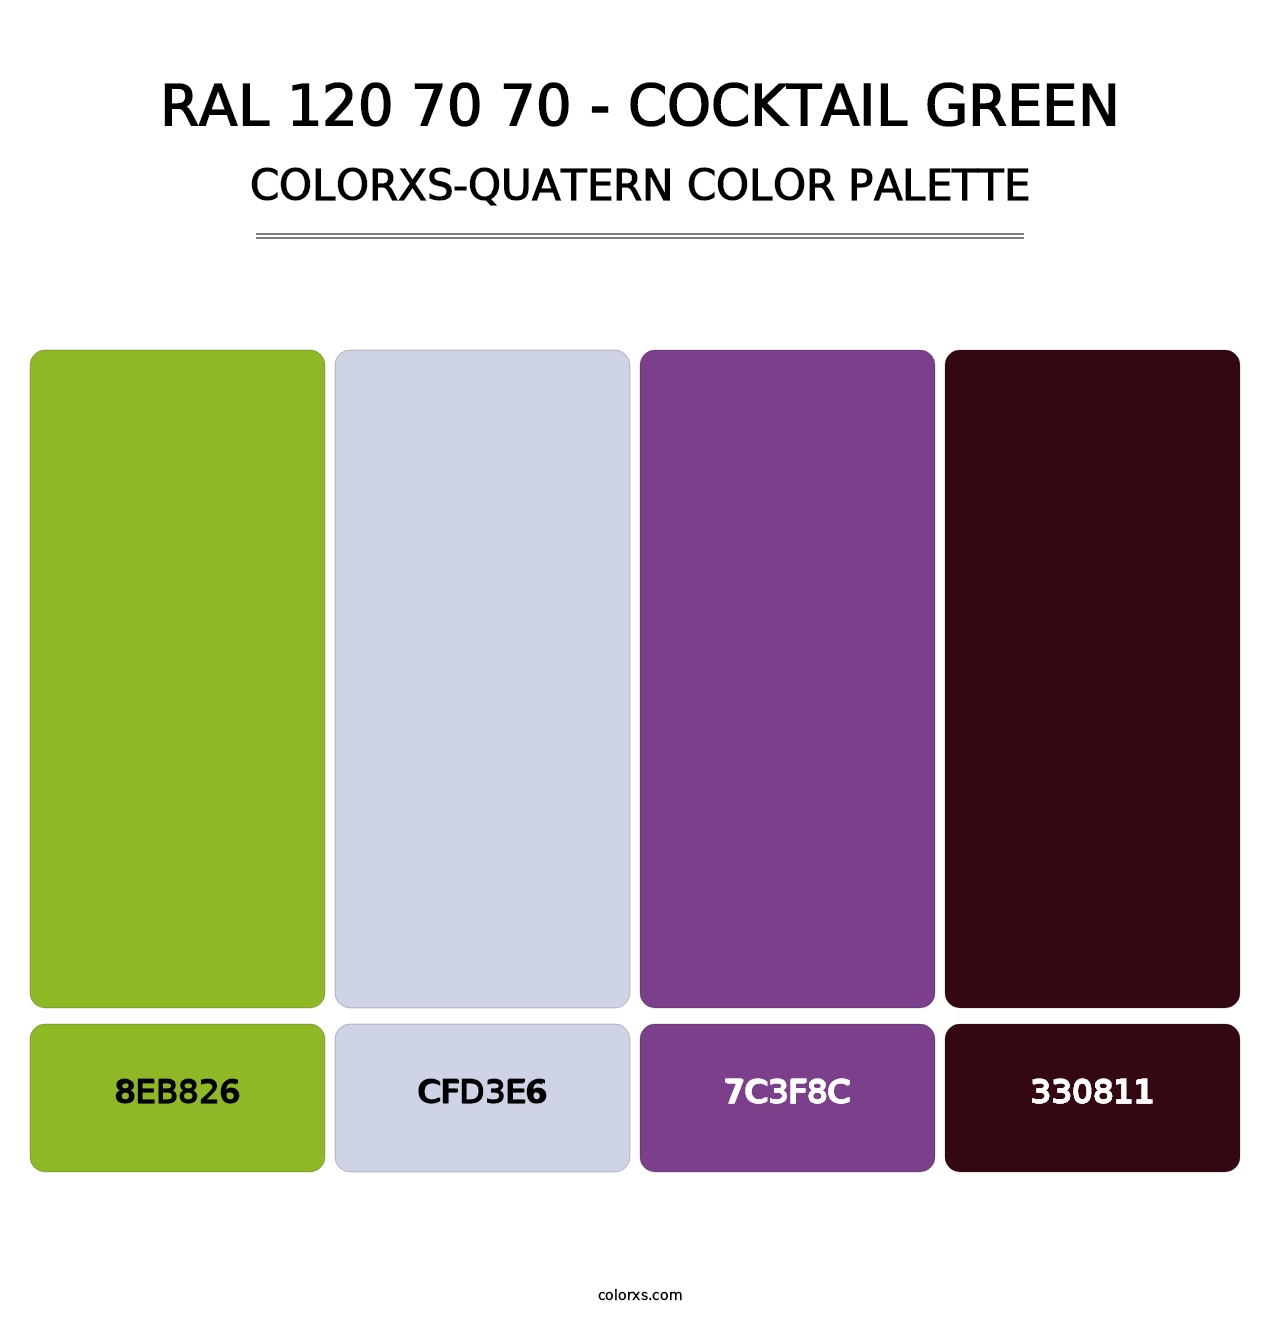 RAL 120 70 70 - Cocktail Green - Colorxs Quatern Palette